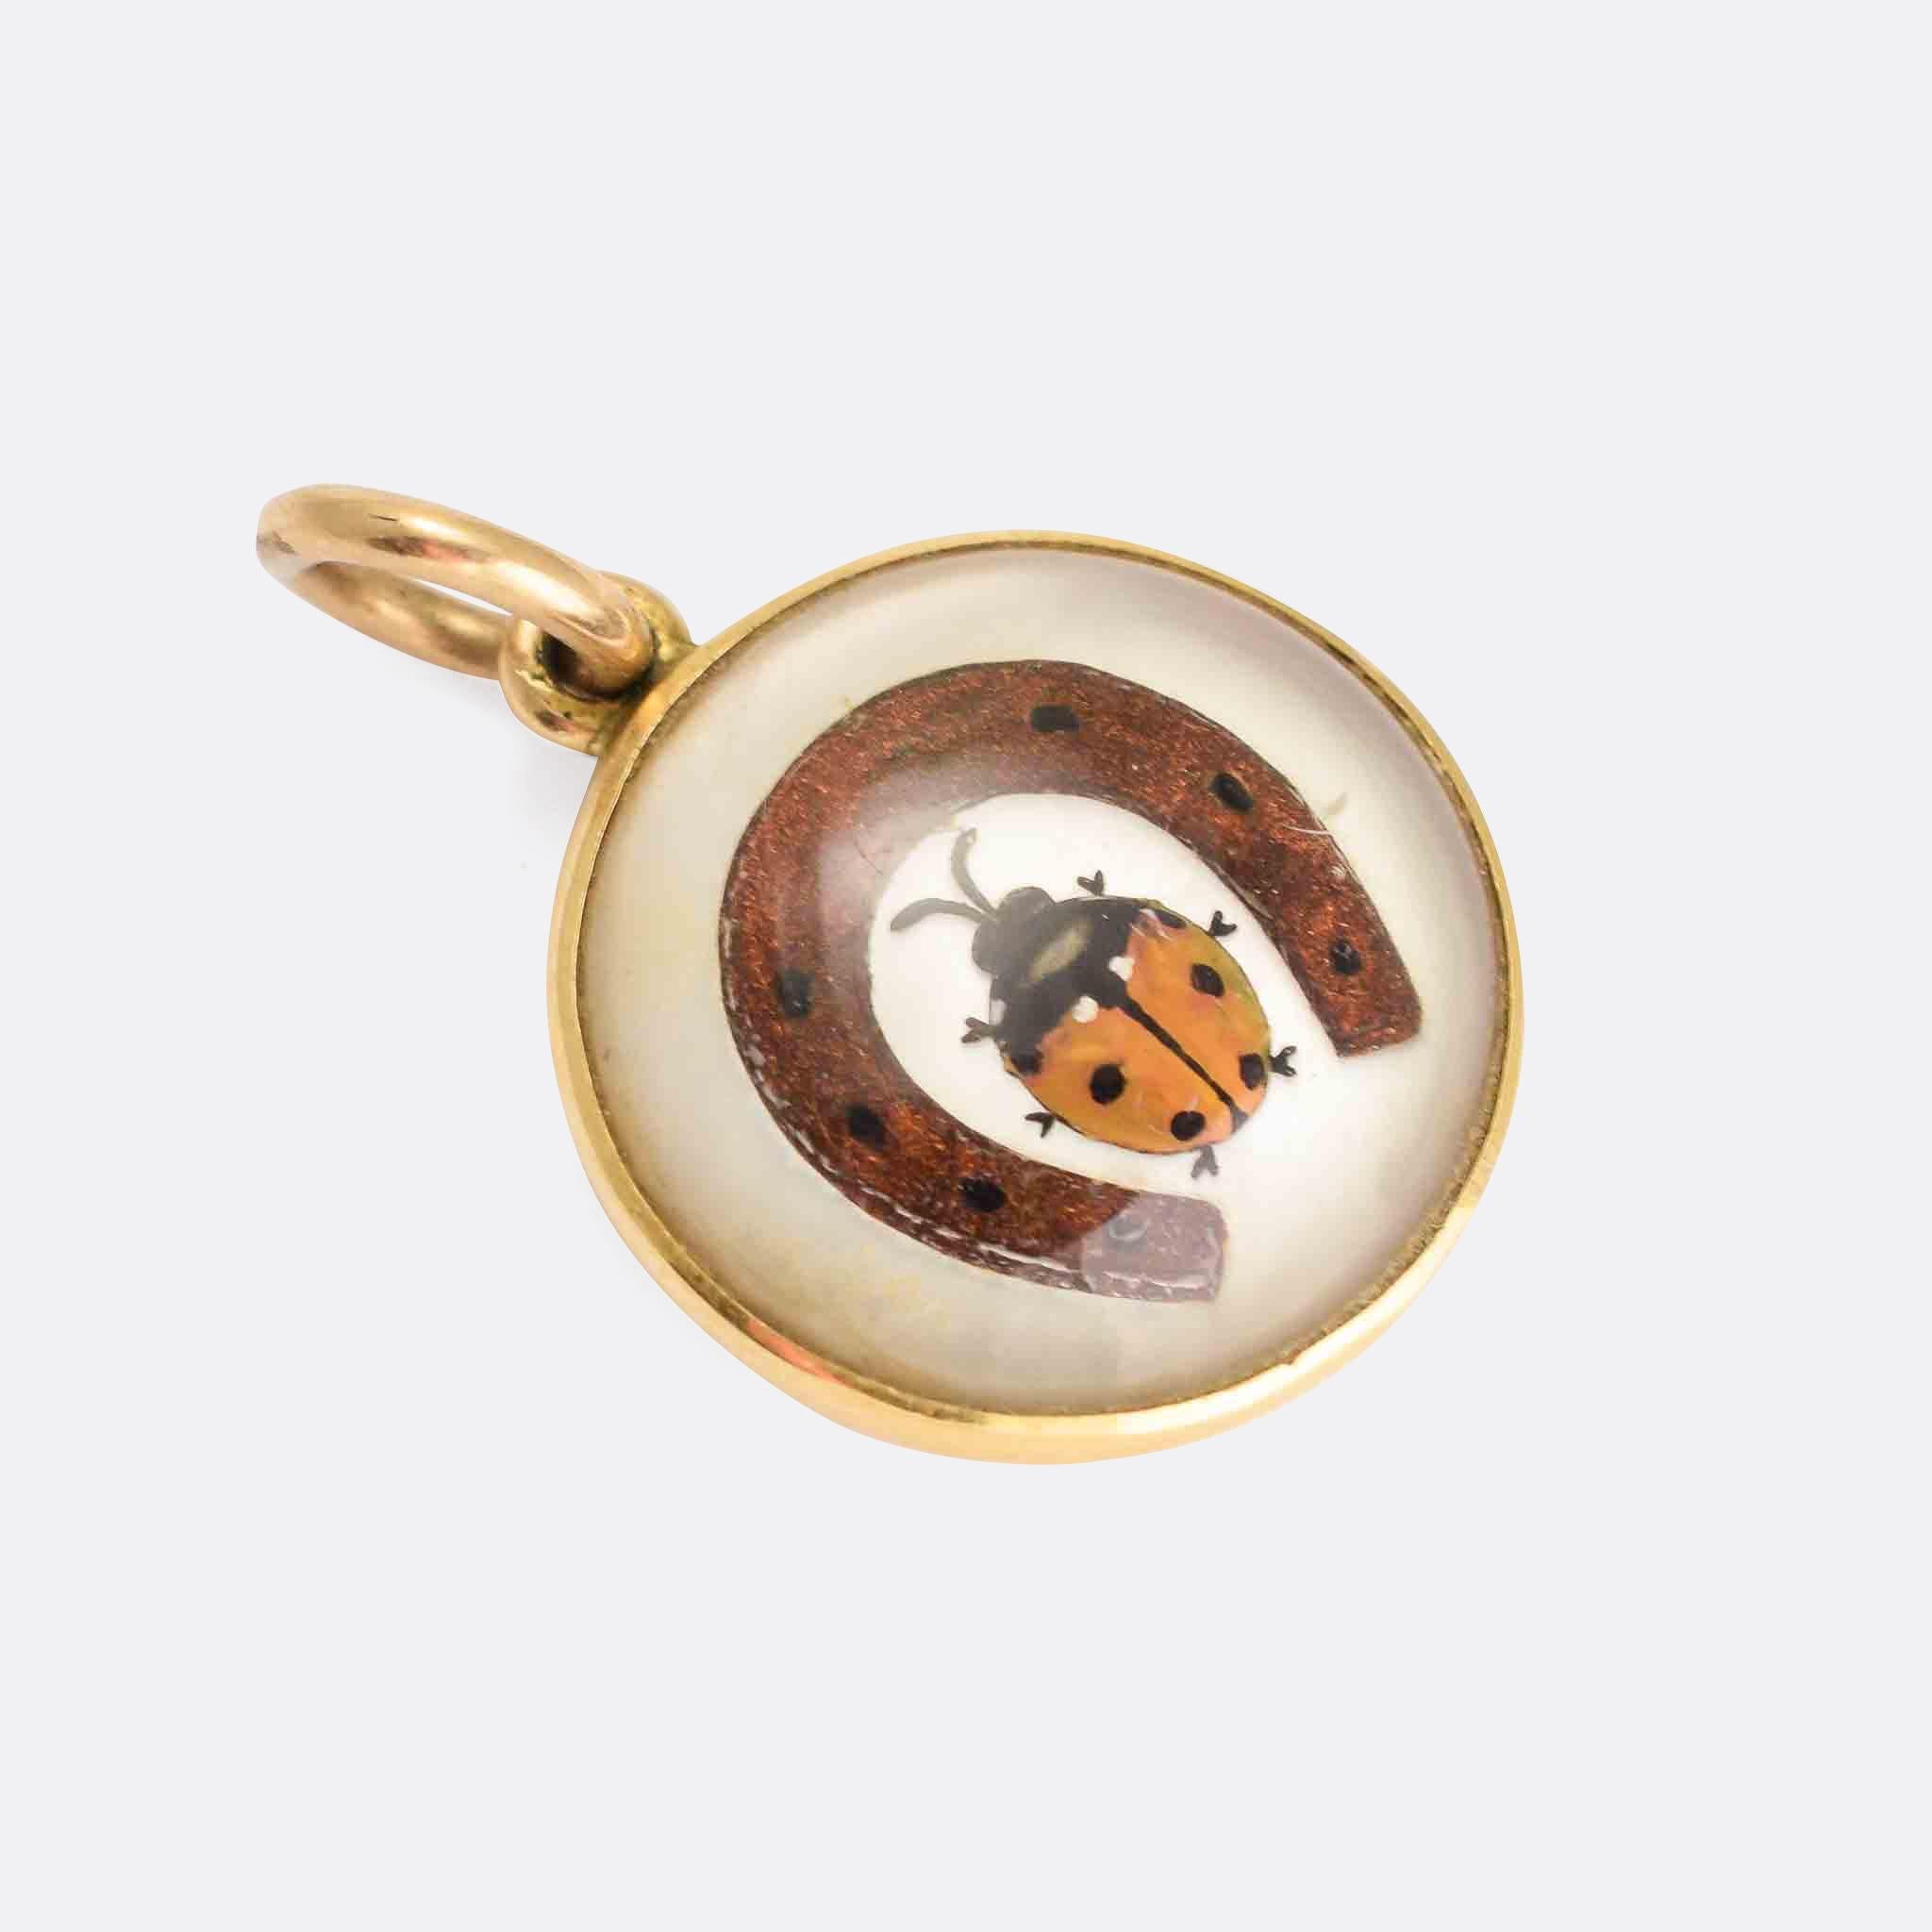 A super cute antique Essex Crystal lucky charm pendant. The rock crystal cabochon has been reverse carved and painted with a ladybird within a horseshoe. It's mounted in 18 karat gold, and dates from the Victorian period, circa 1870.

STONES 
Essex